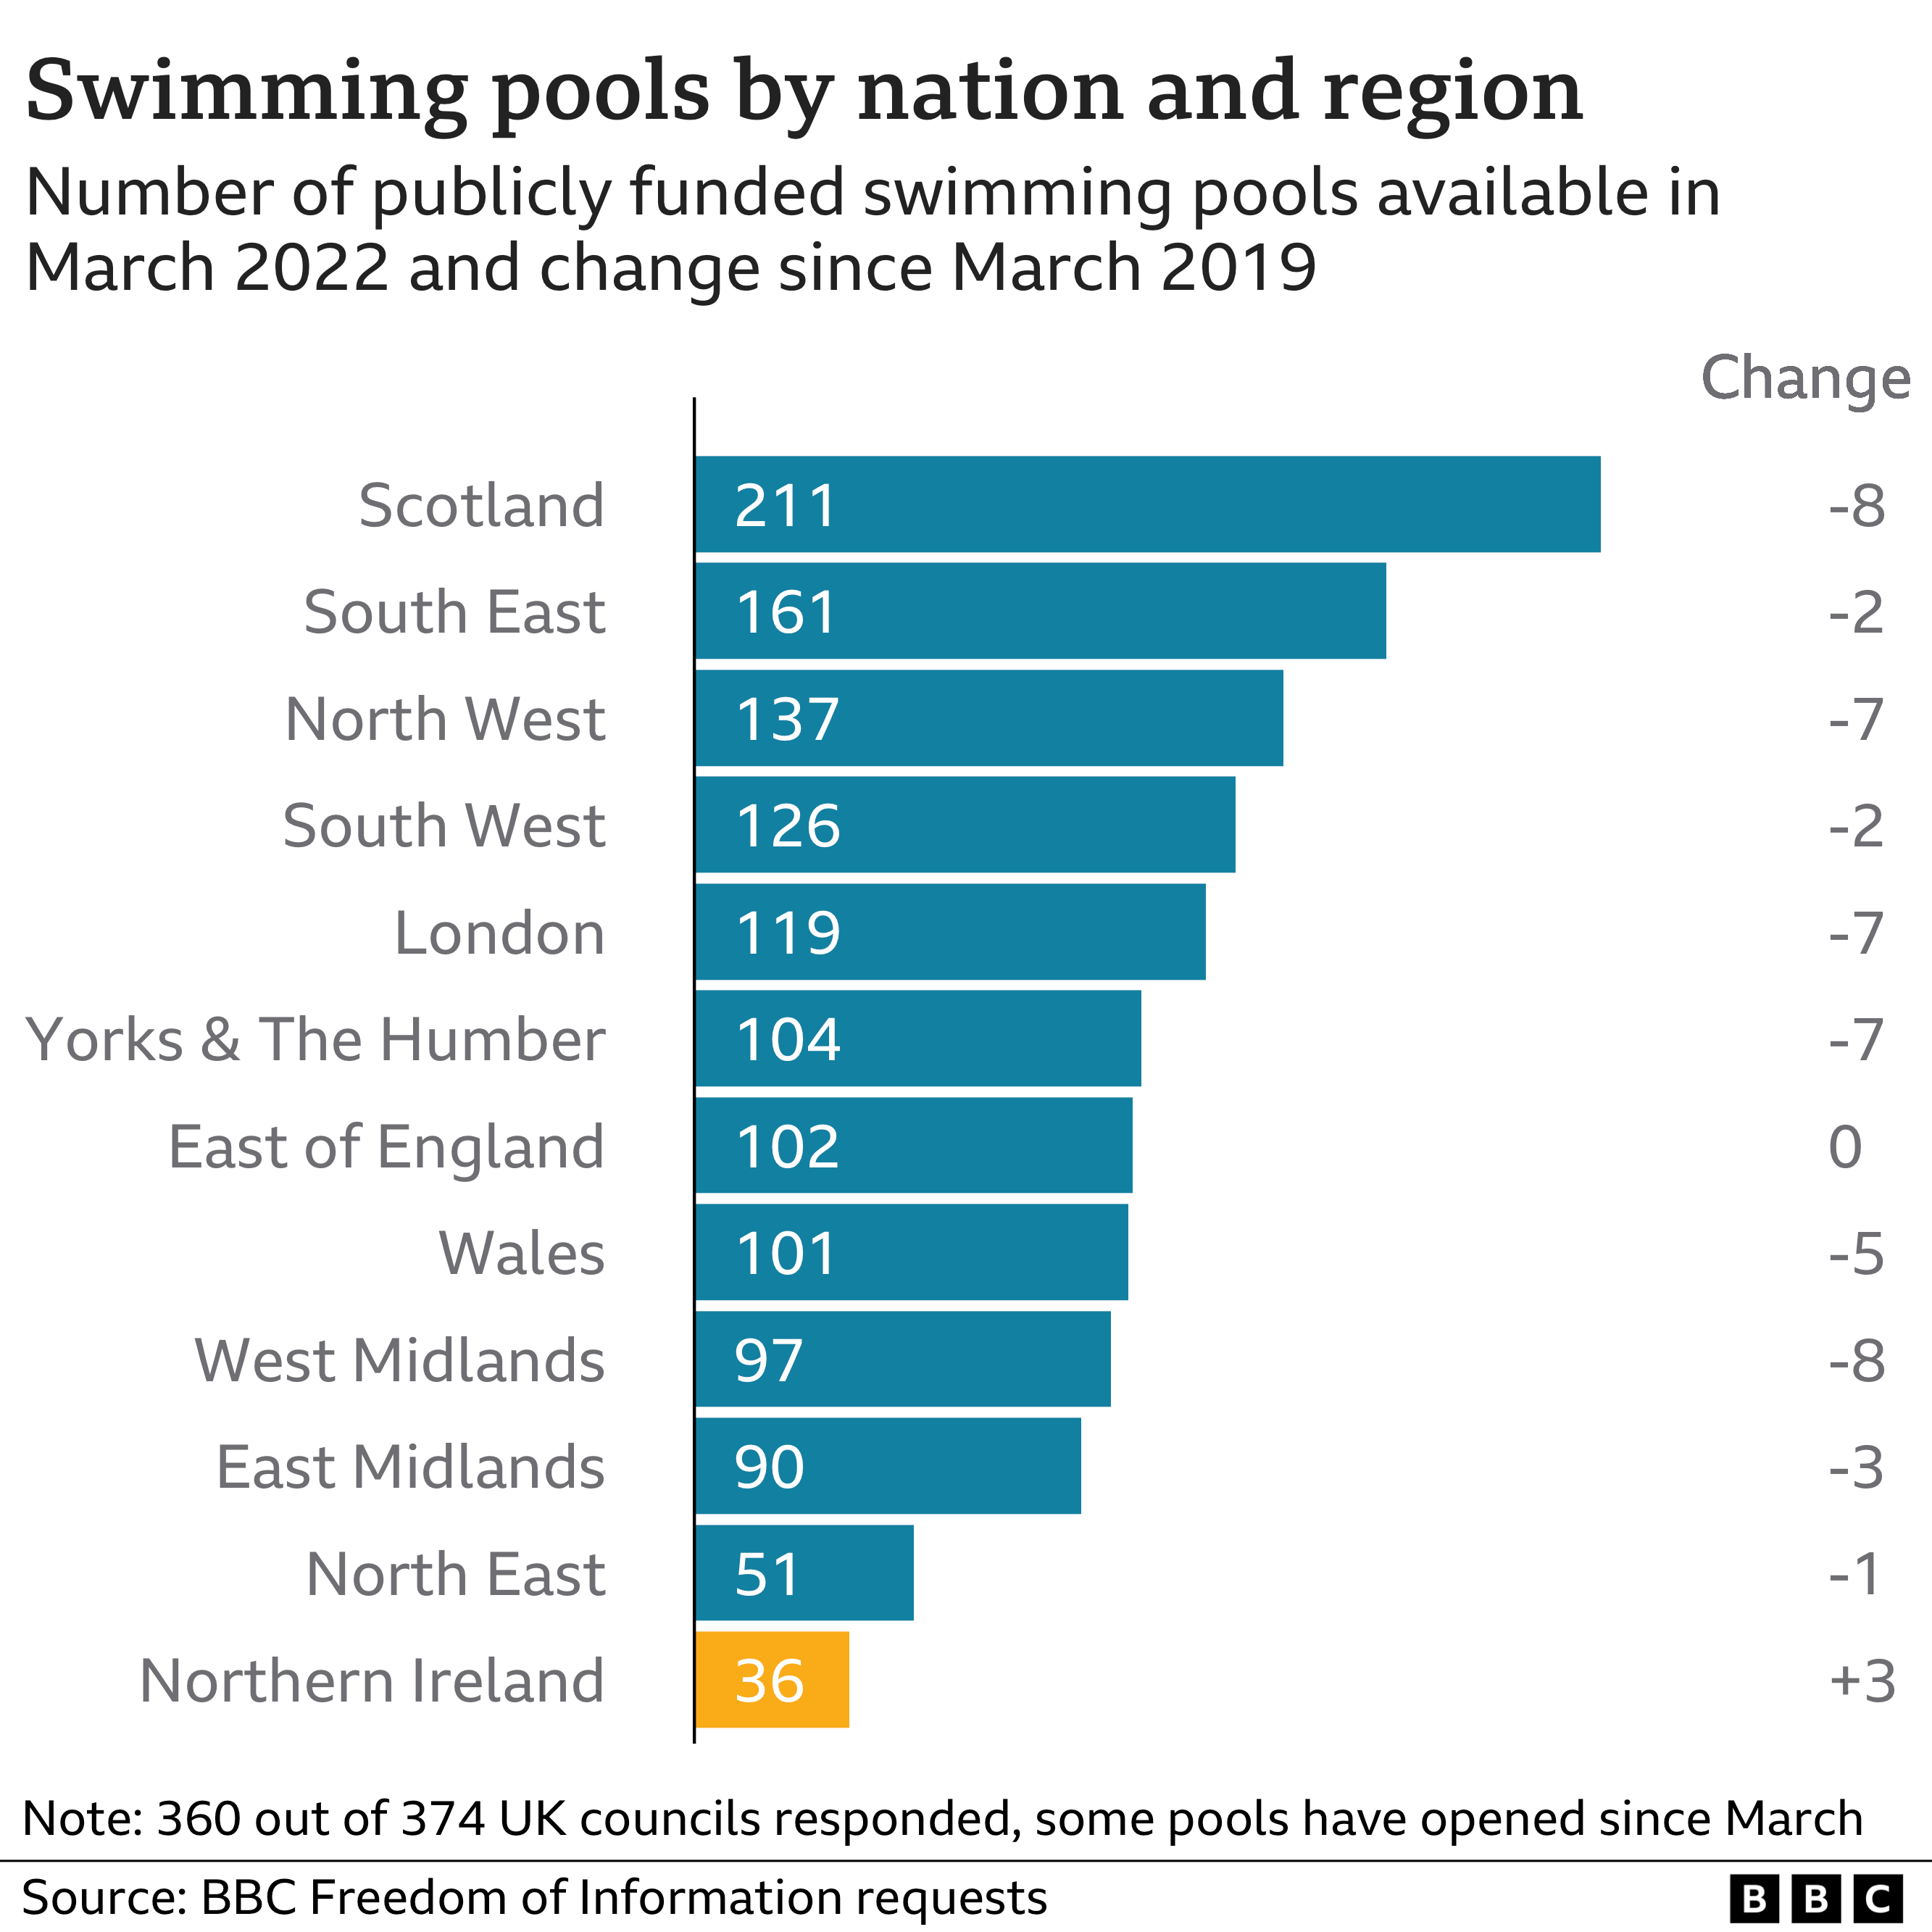 Chart showing the number of public swimming pools by UK nation and region and change in pools since 2019